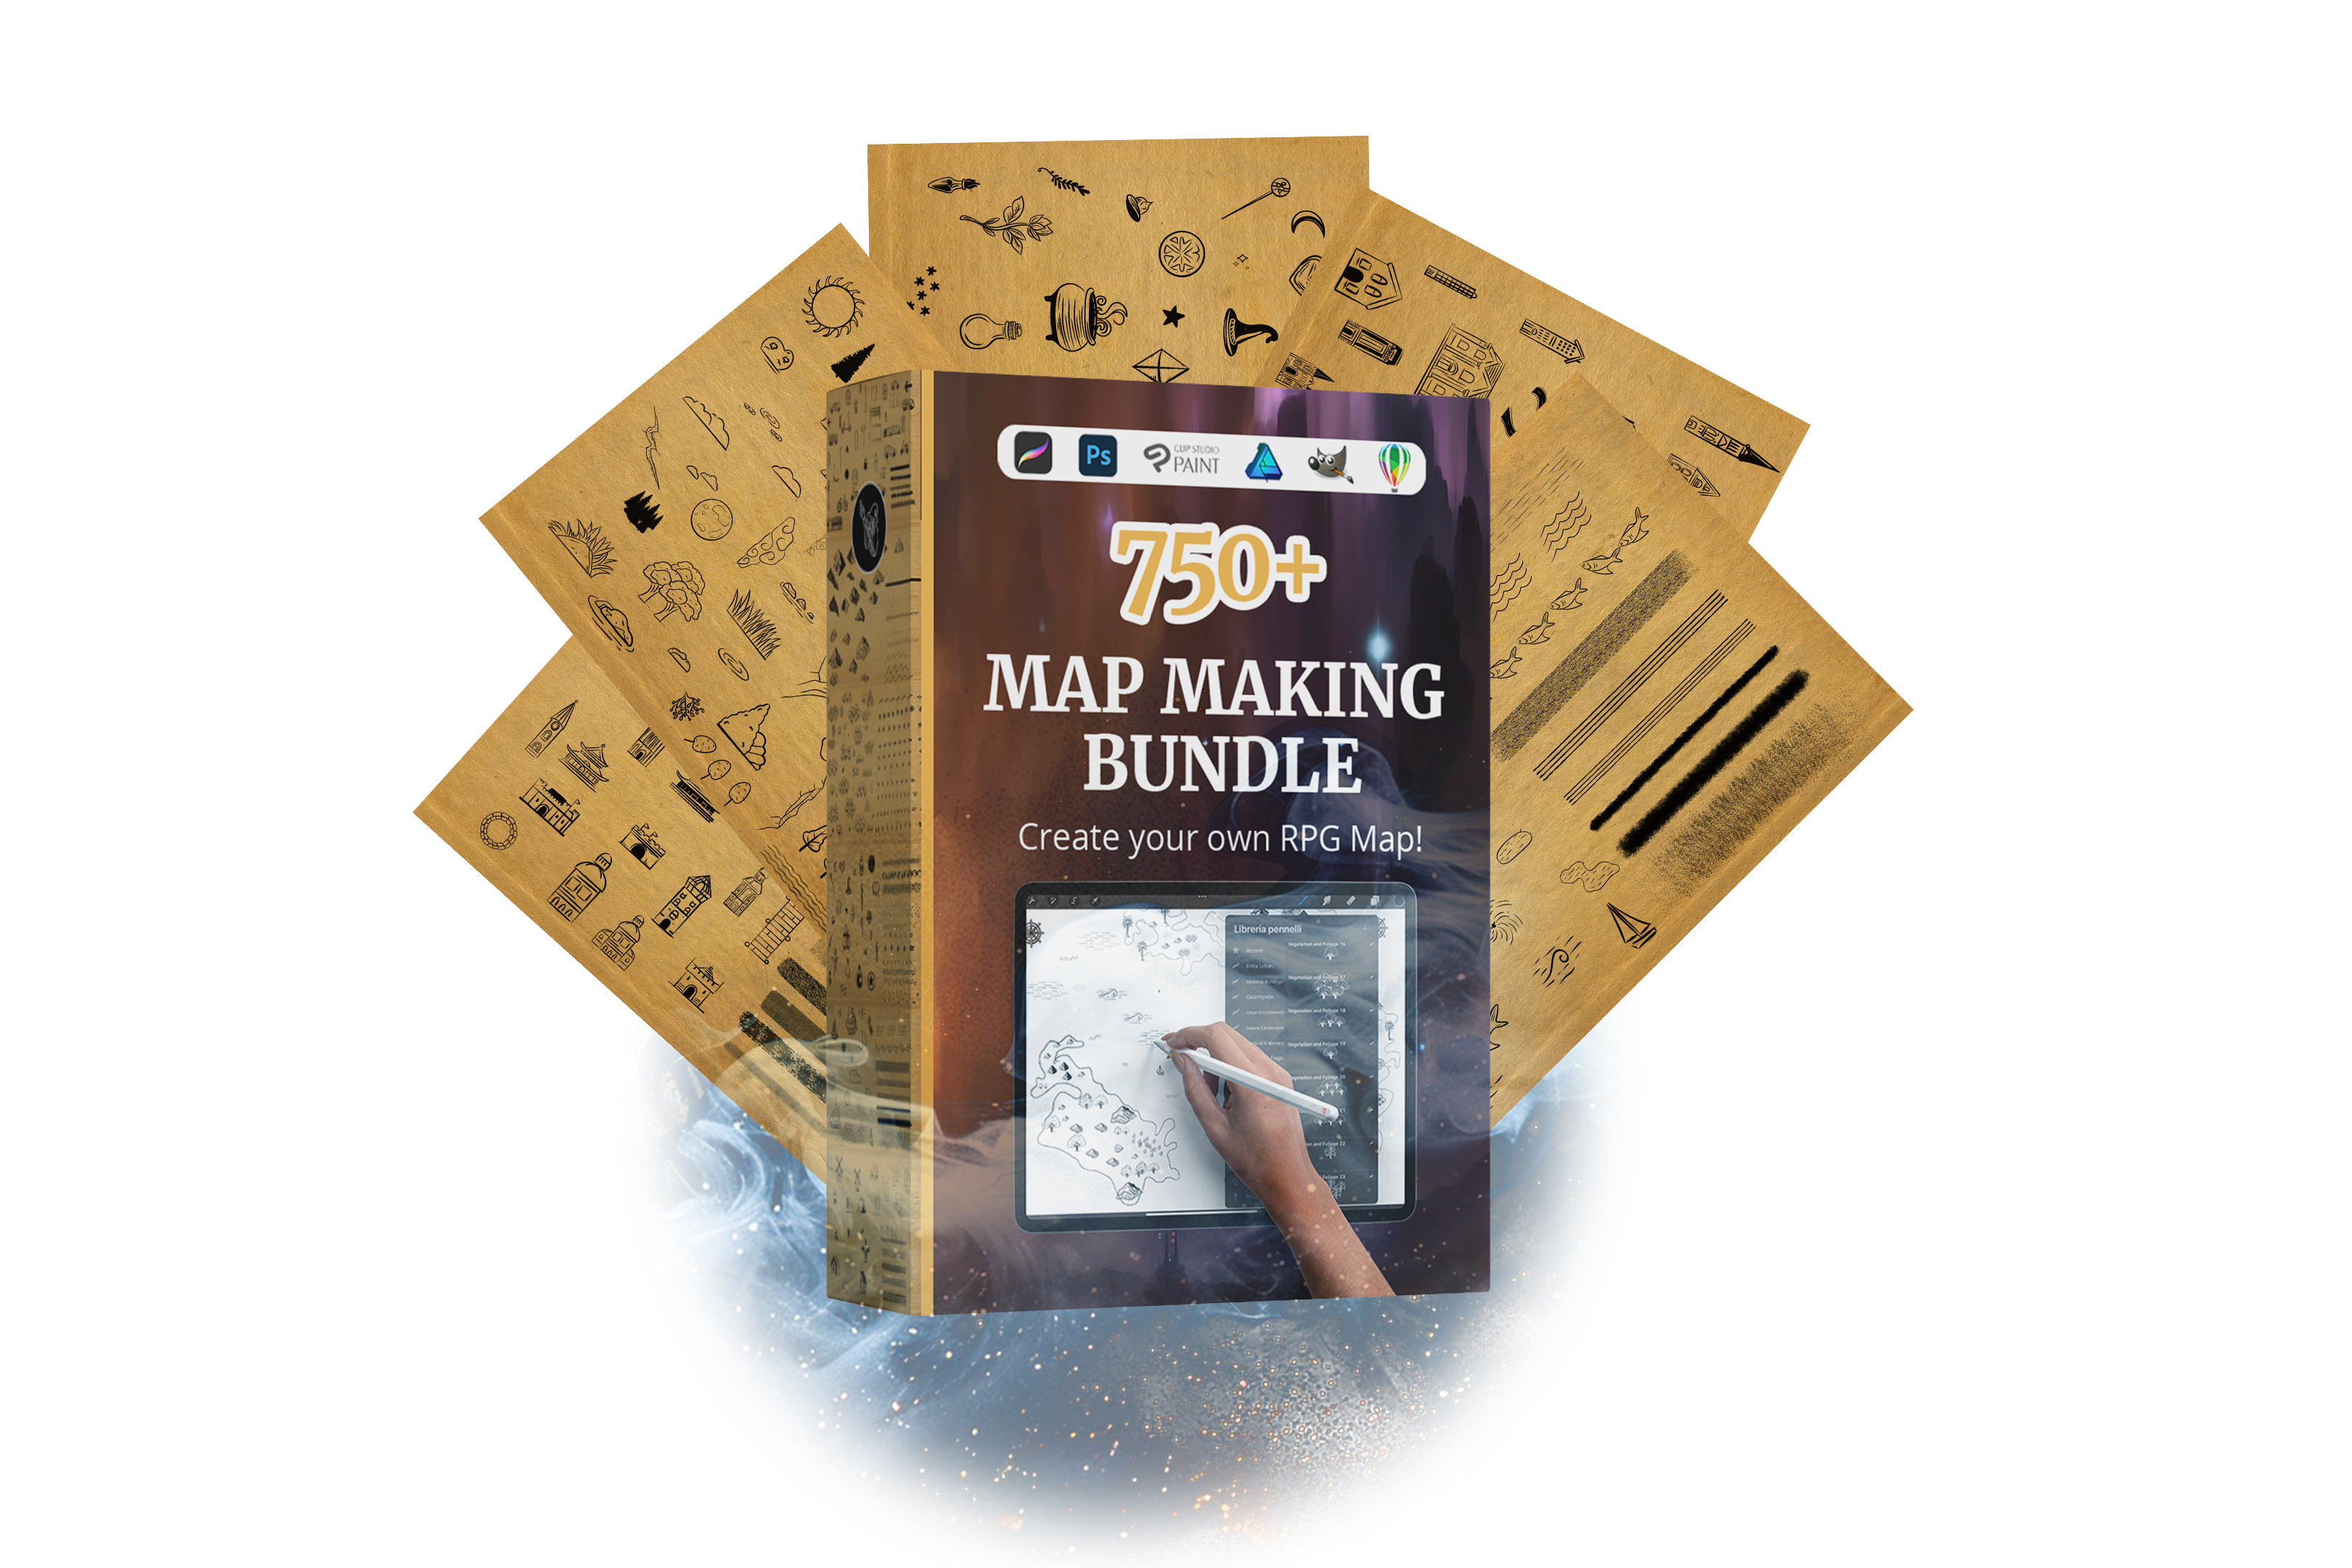 Wizard Bundle Website.png__PID:9ebbfc38-a509-48db-be87-818fae108adc